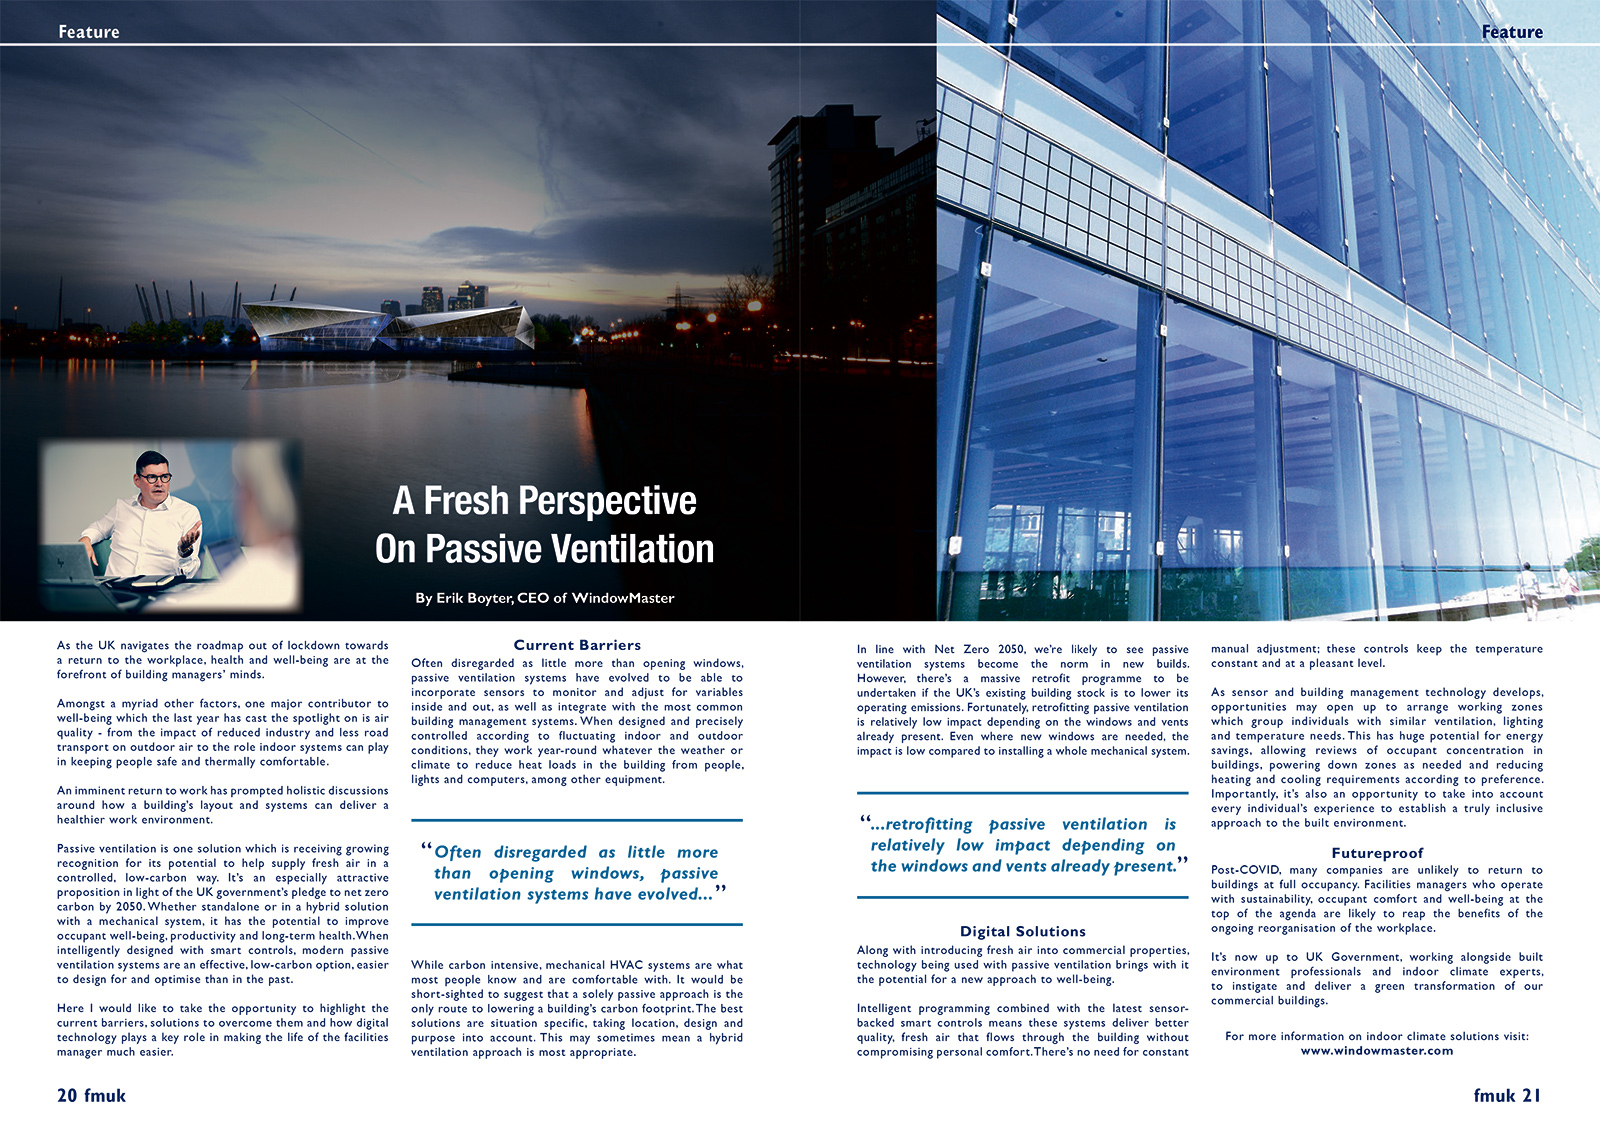 A Fresh Perspective On Passive Ventilation